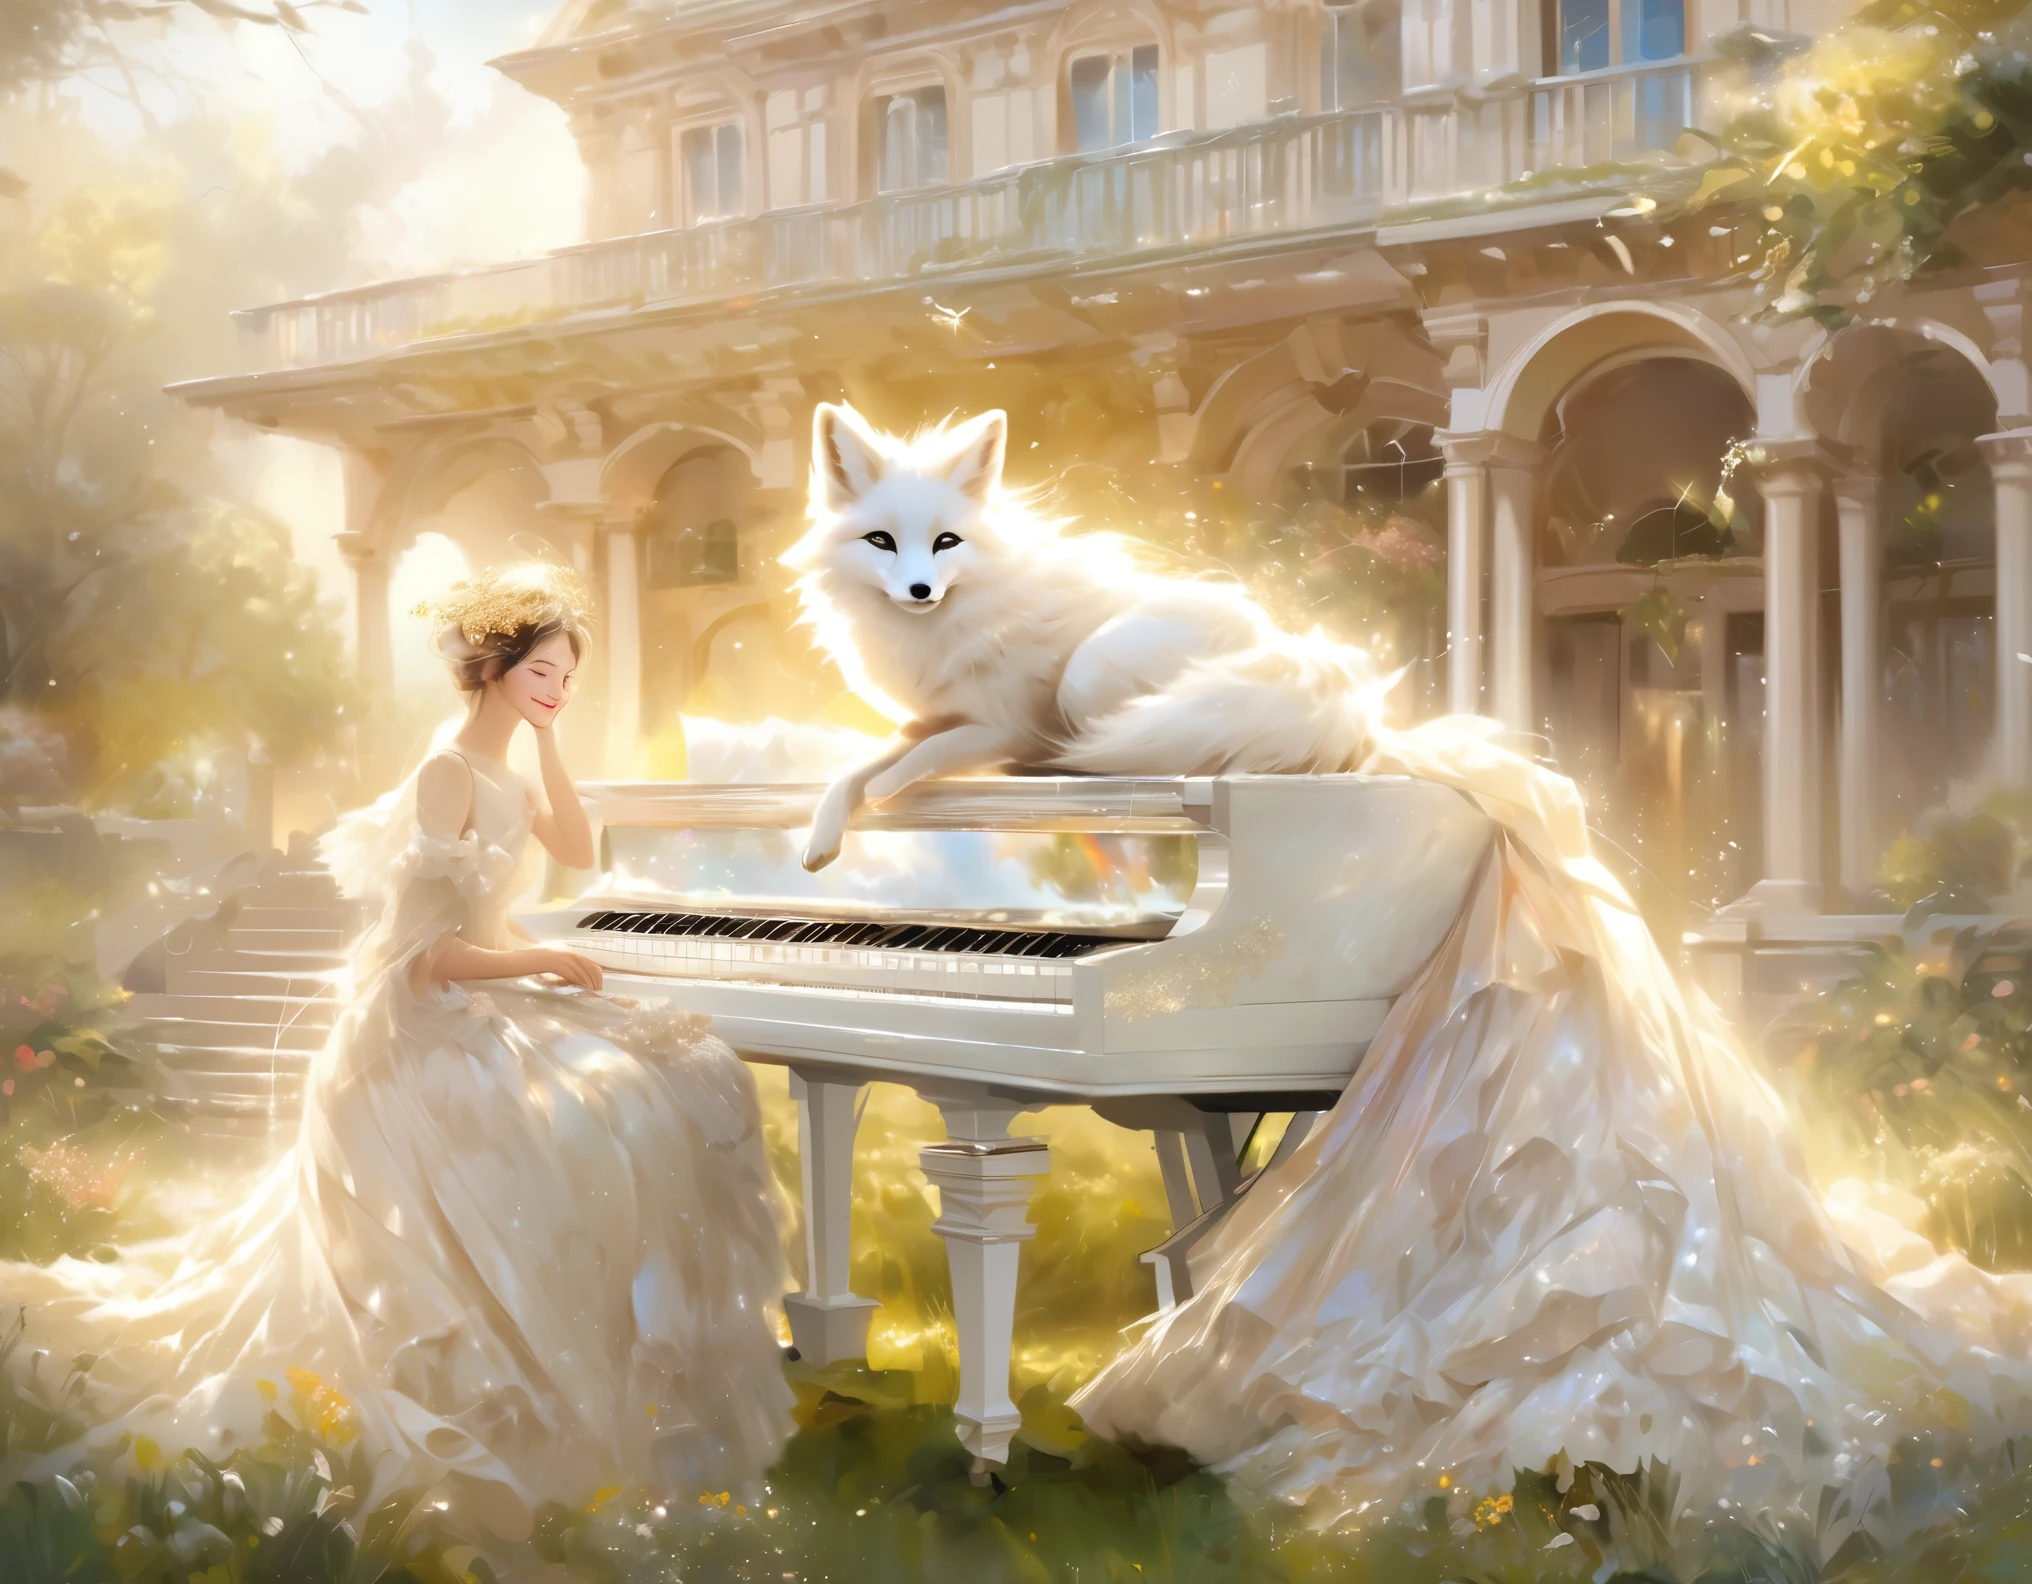 fusion of oil painting and watercolor painting, best quality, super fine, 16k, incredibly absurdres, extremely detailed, delicate and dynamic, furry, beautiful cute white fox fairy, happy smile, lovely wedding dress and veil with frills and lace, white grand piano playing the piano in the grassy courtyard of Northern Renaissance mansion, the season is June, sunlight filtering through the trees, rain showers, sparkling raindrops, various image effects in gentle colors with gold glitter